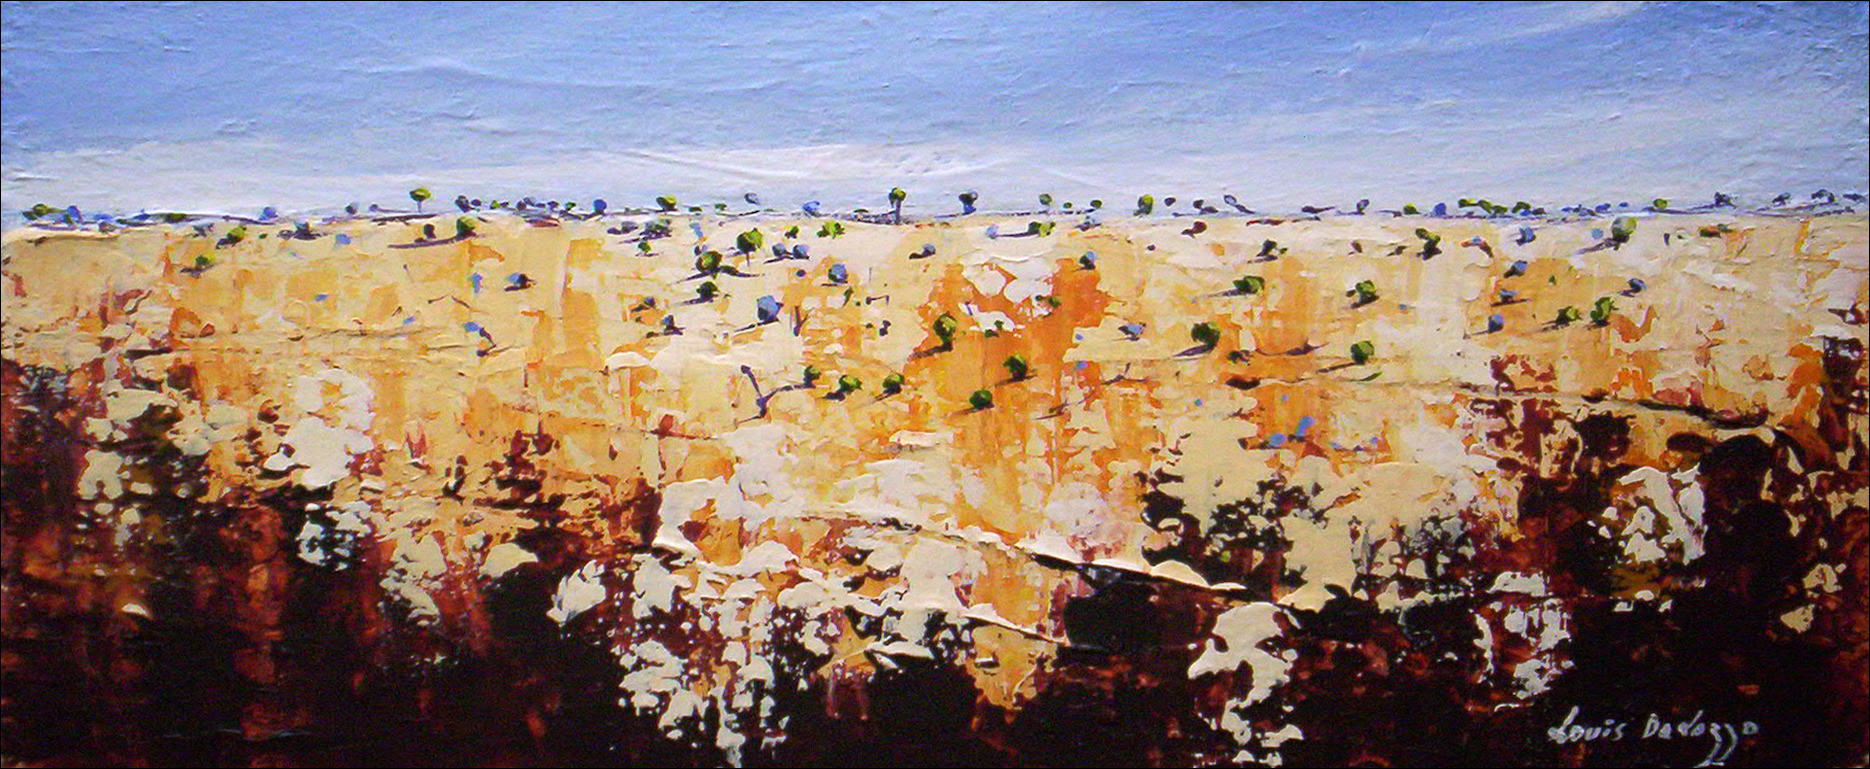 Edge Of The Stony Landscape "Mitchell Grass Country 2" Original Artwork by Louis Dalozzo